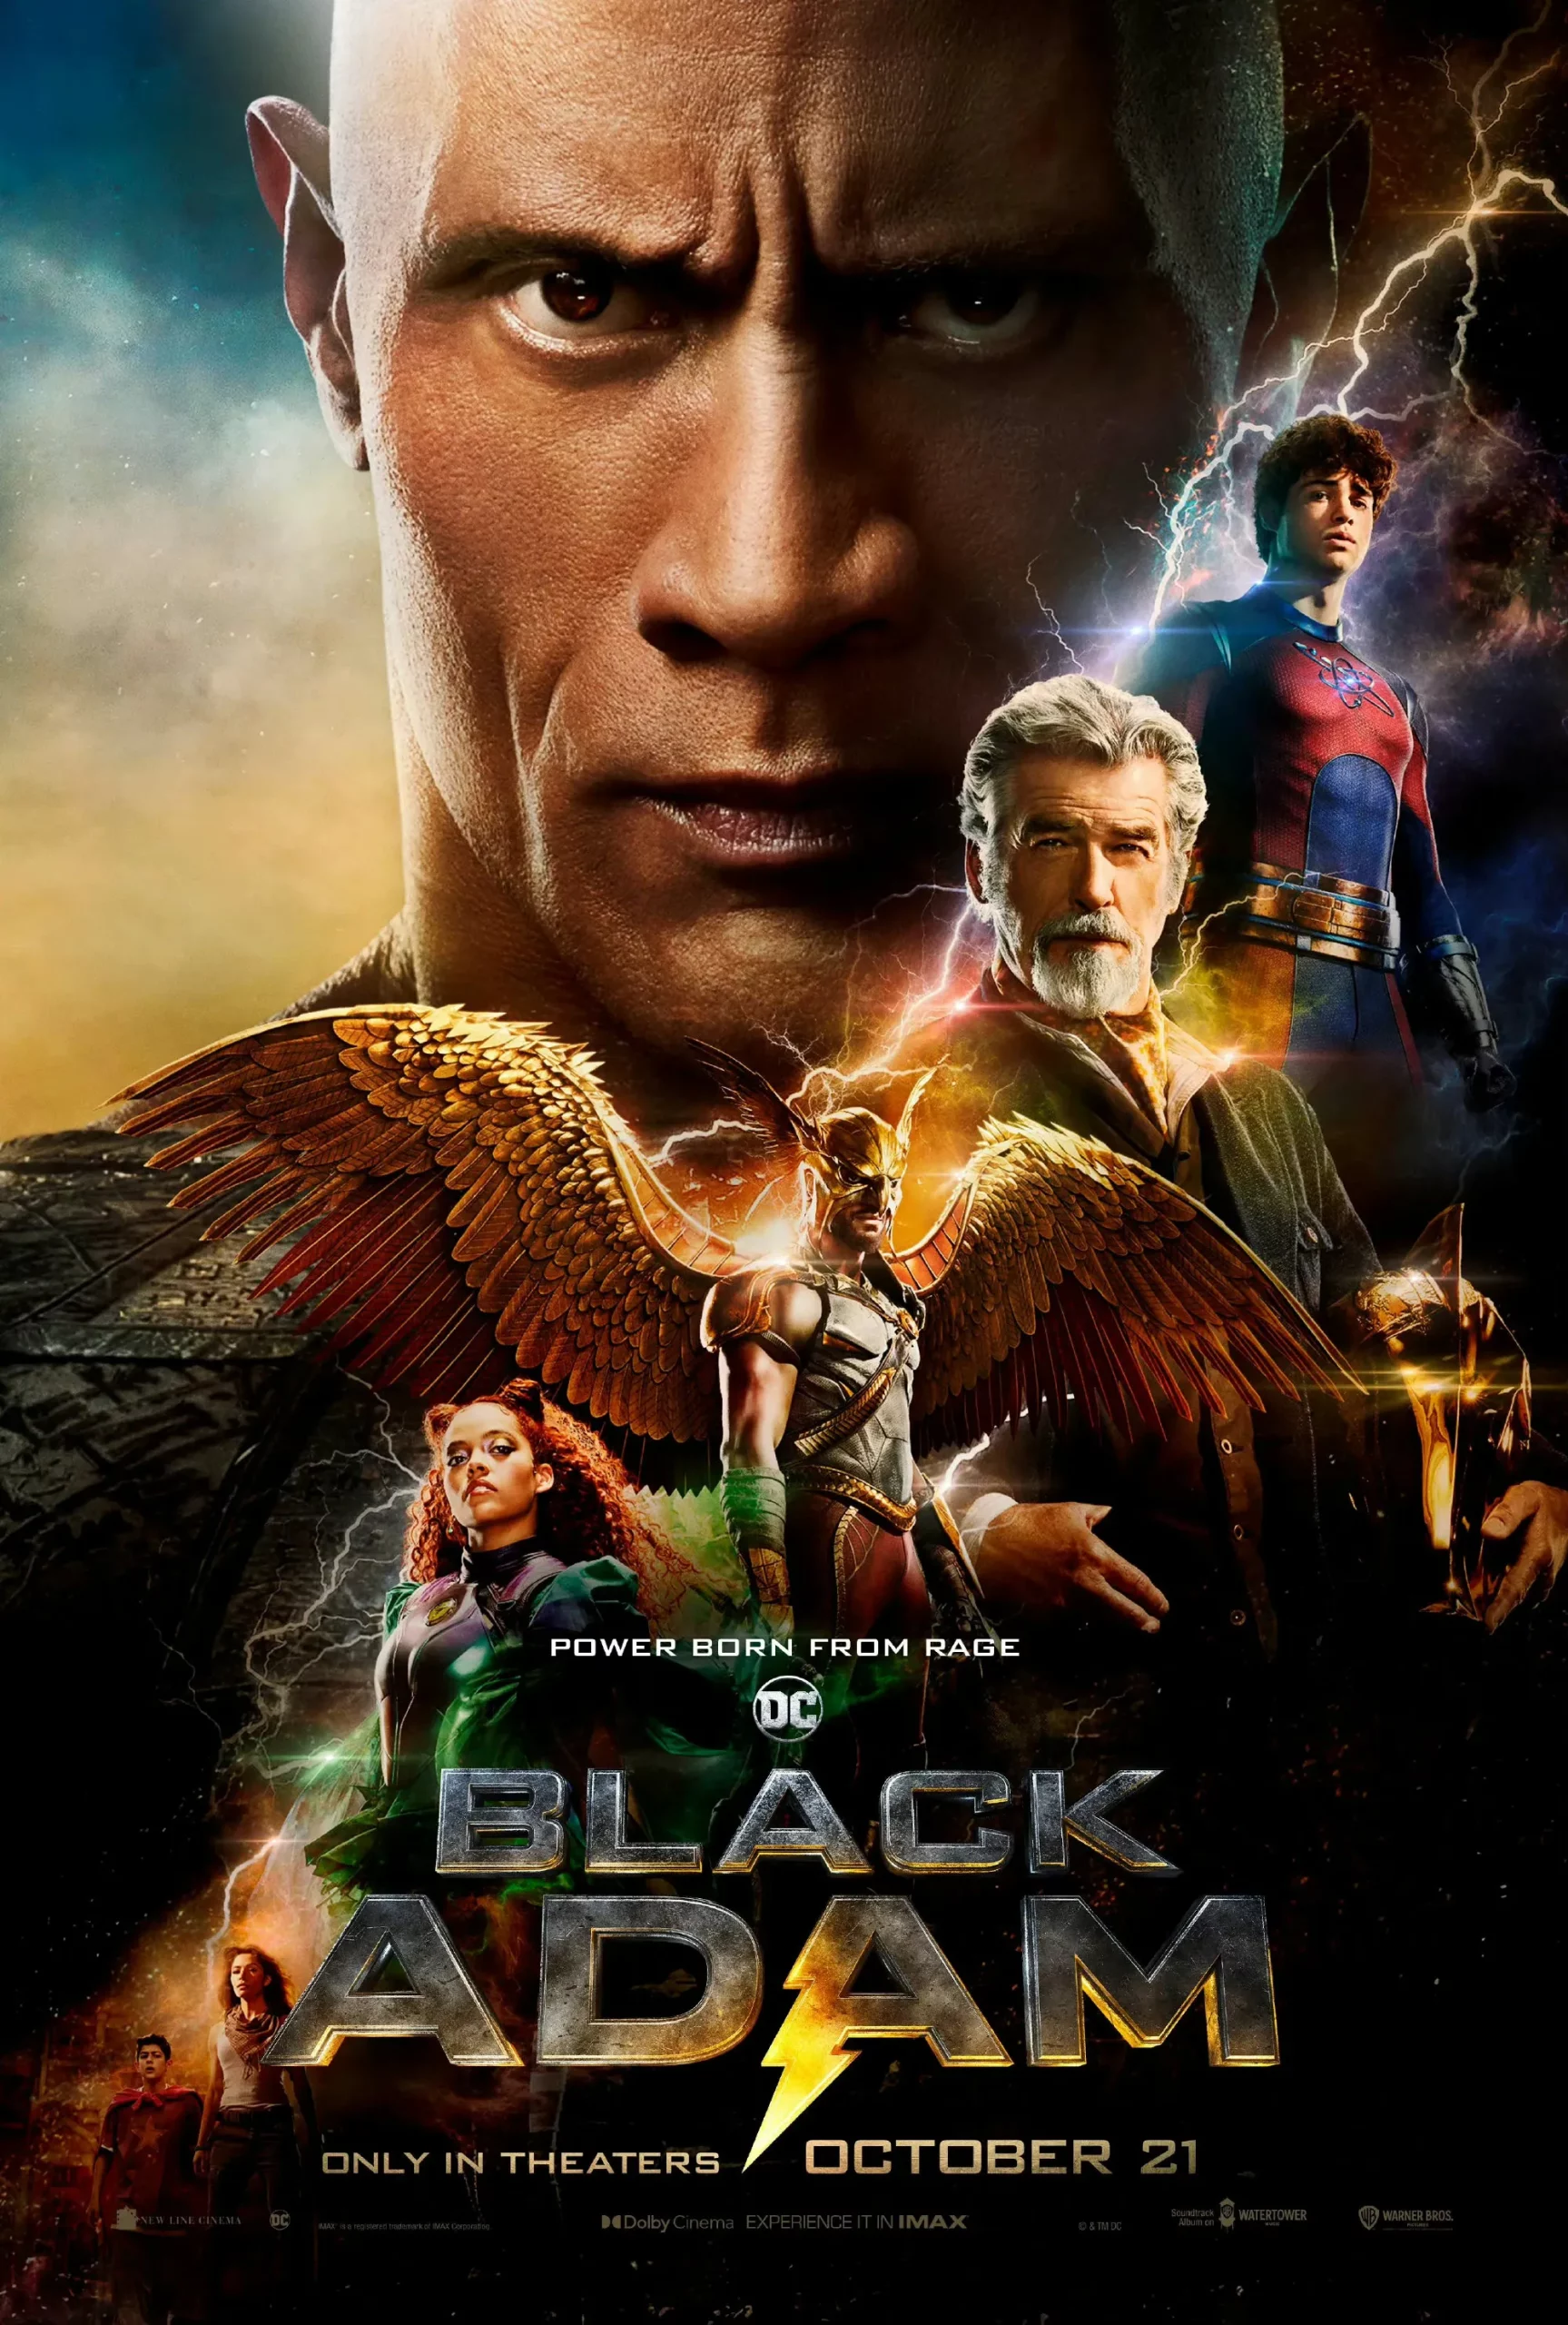 DC's New Film 'Black Adam' Rated PG-13 at Northern America | FMV6